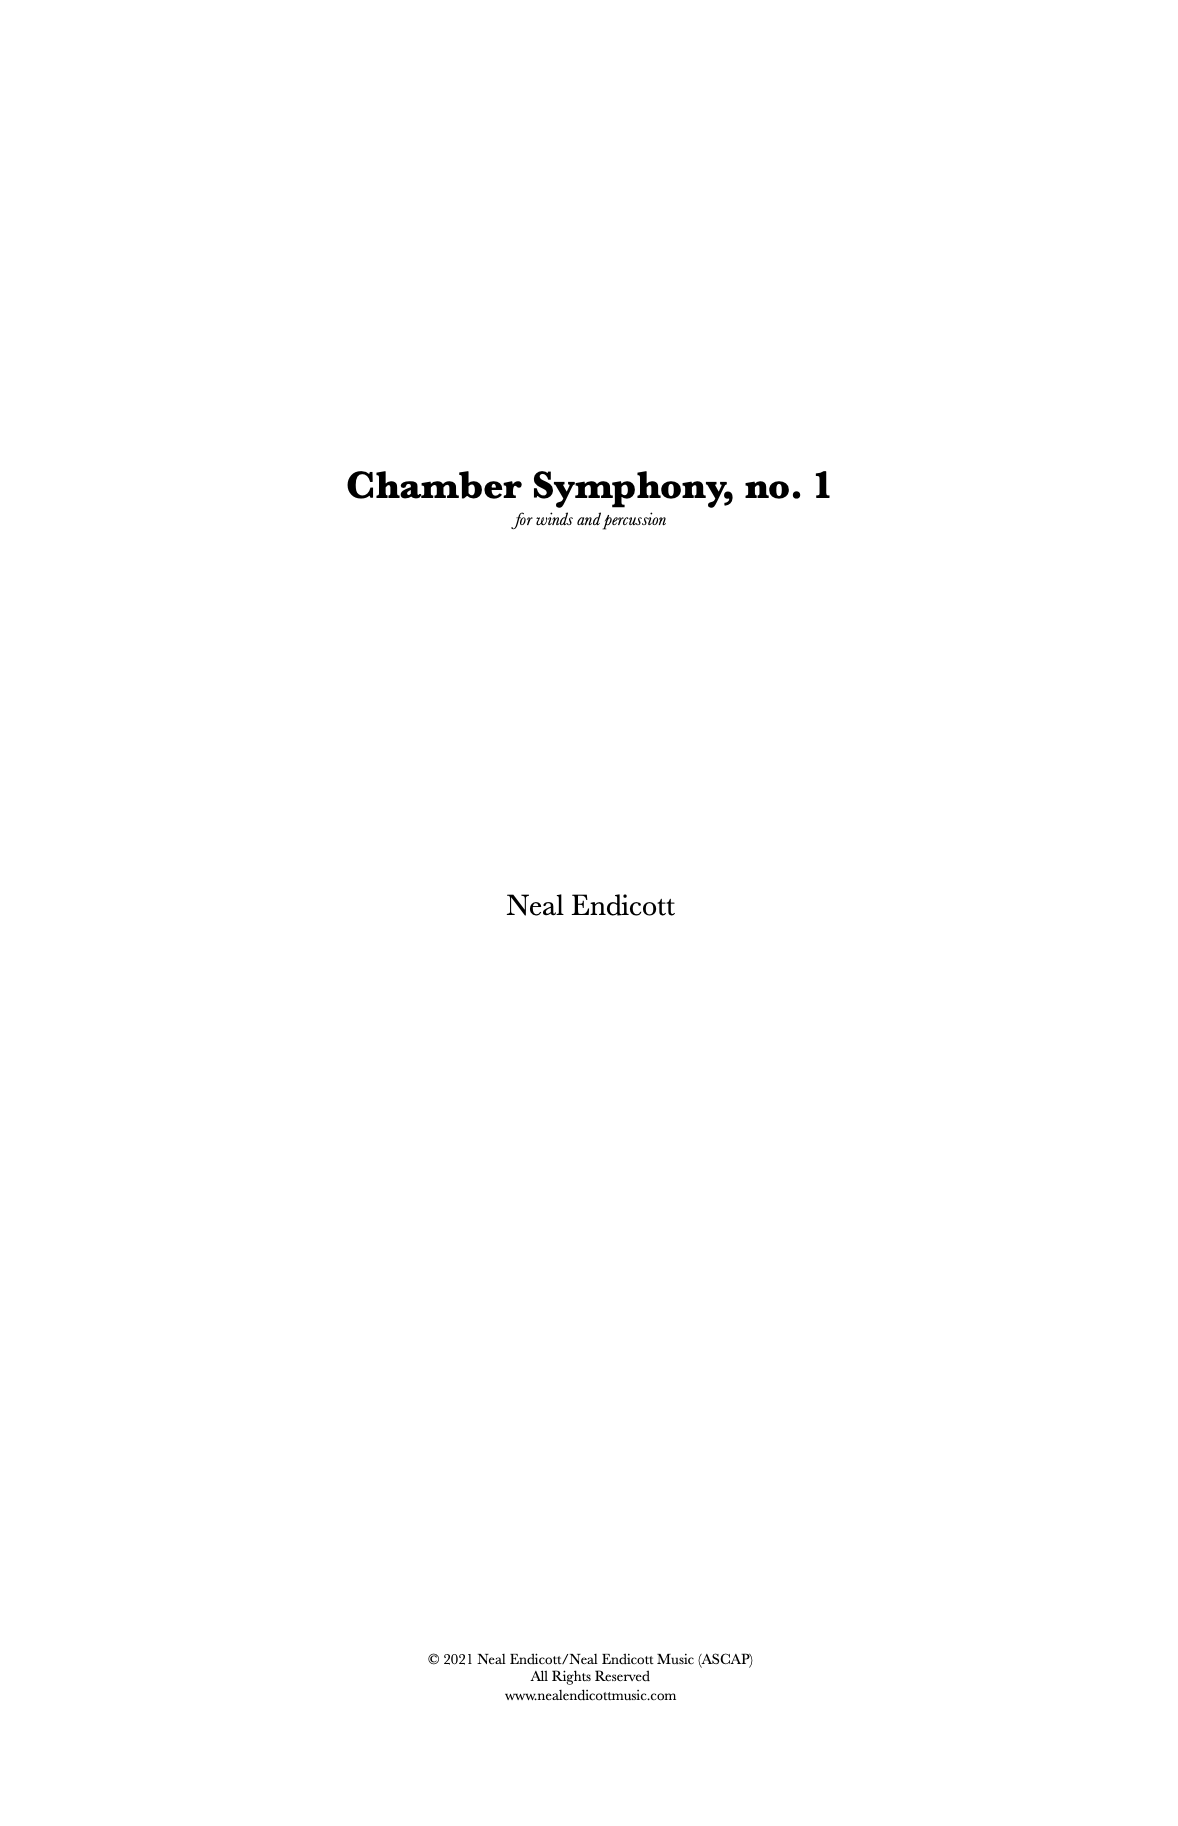 Chamber Symphony No. 1 (Score Only) by Neal Endicott